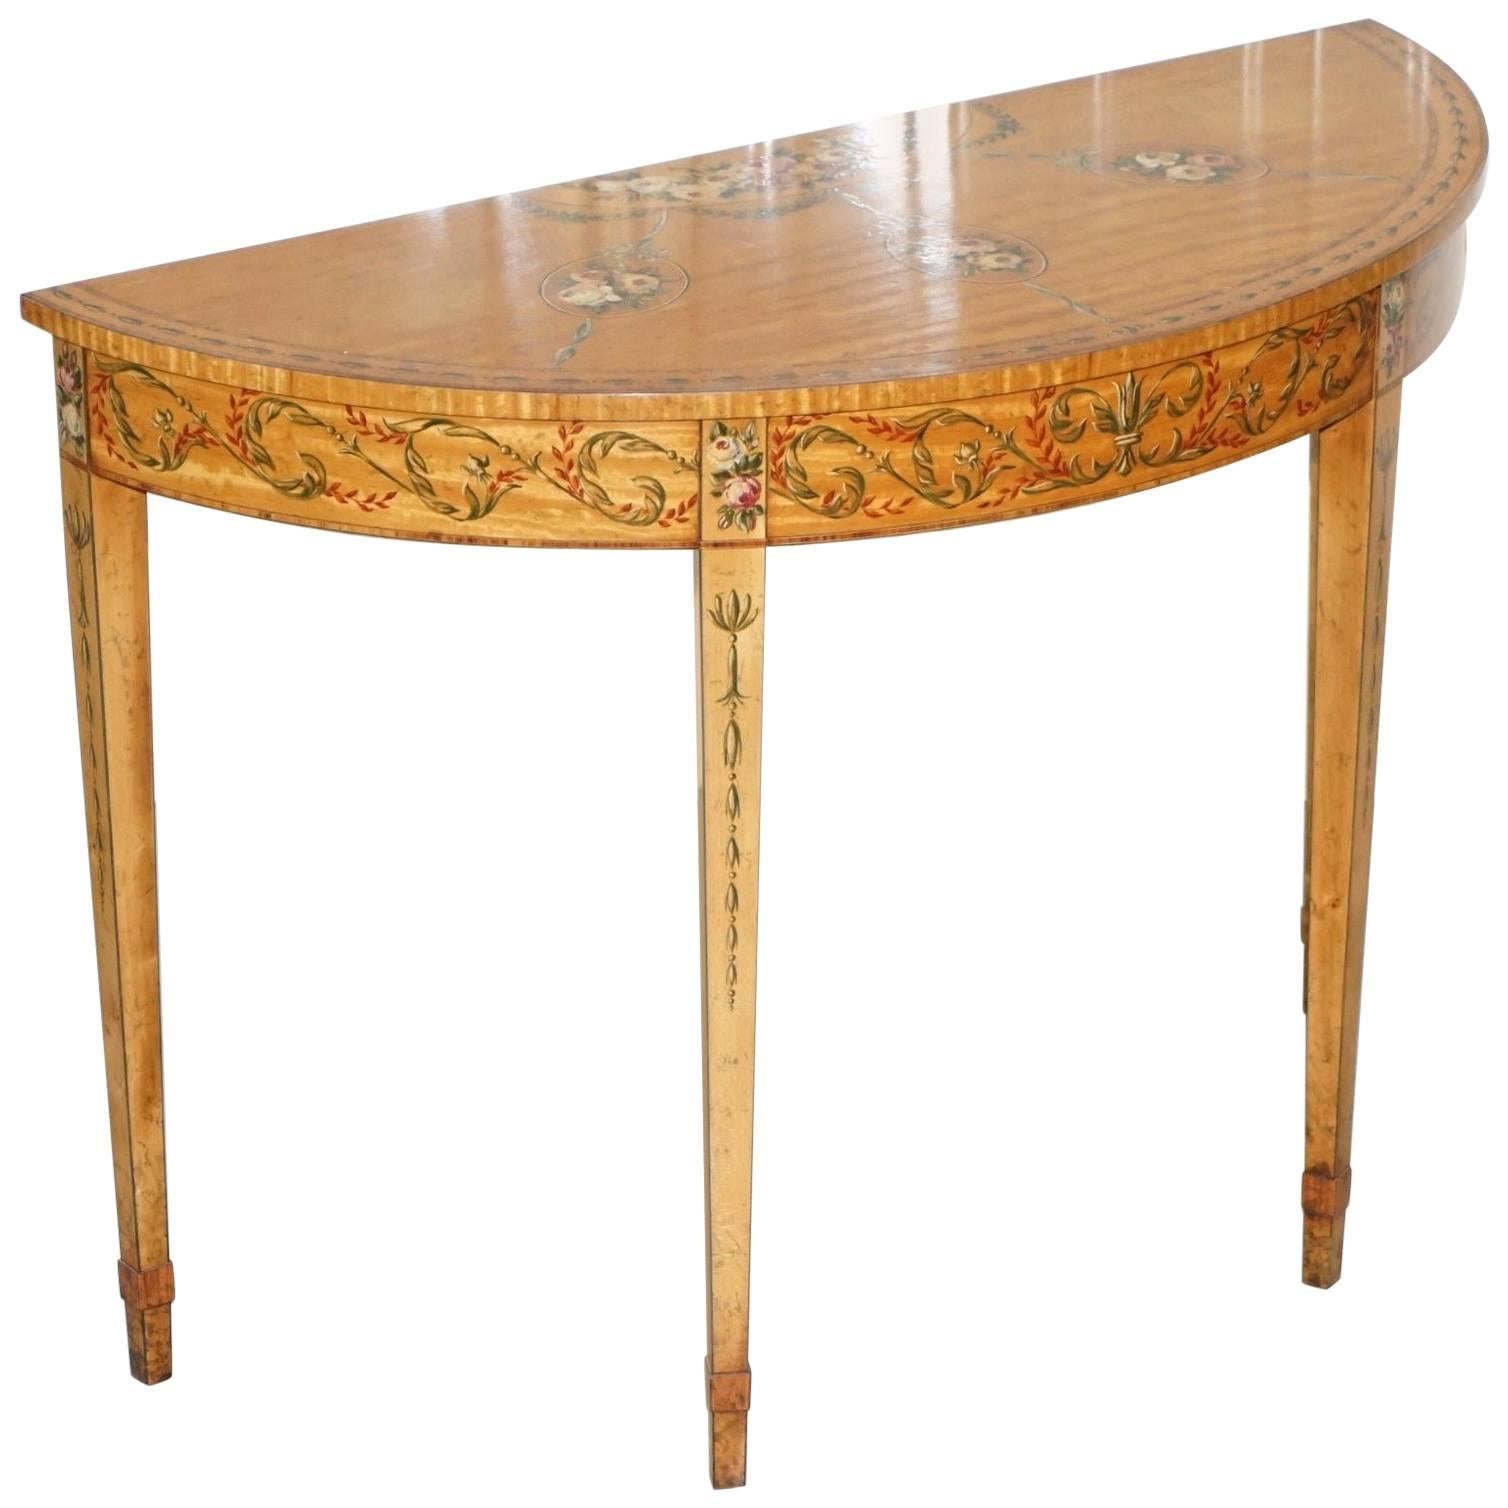 Hand-Painted Satinwood Sheraton Revival Victorian Demi Lune Console Side Table